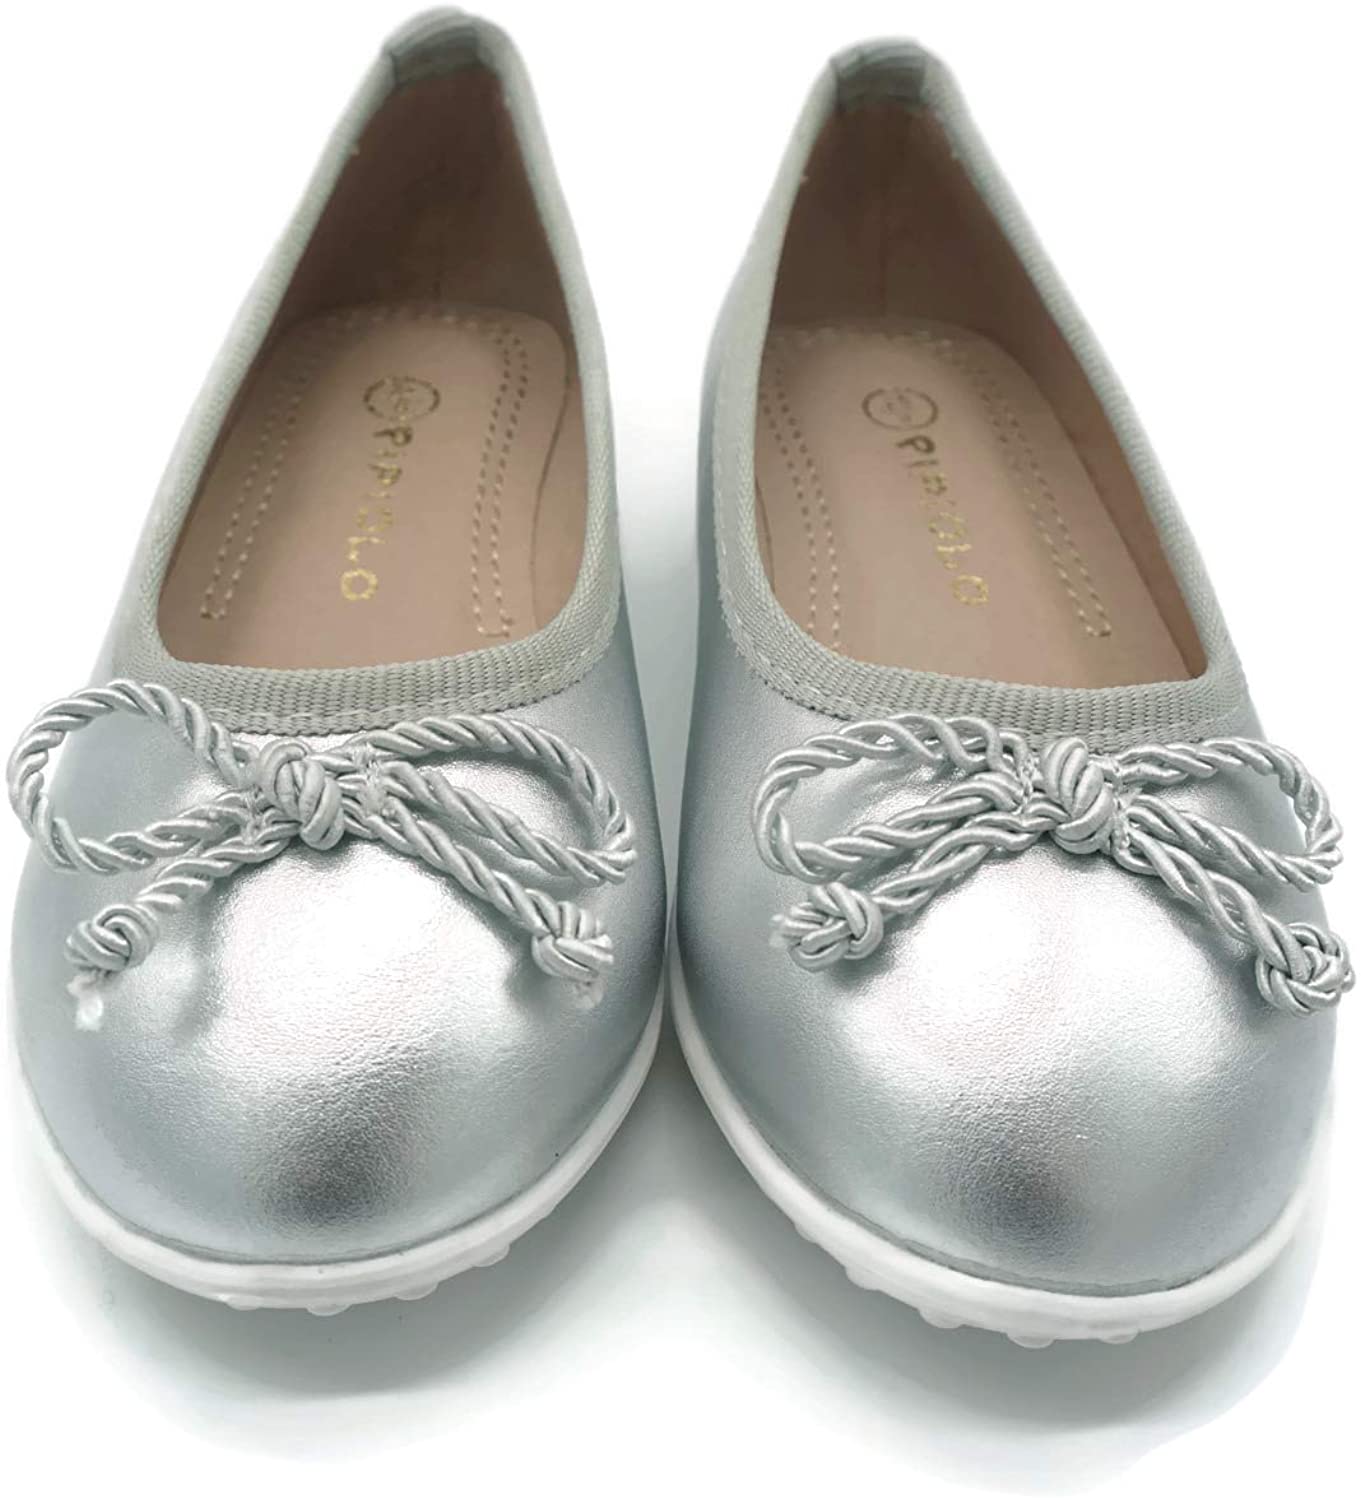 Pipiolo Sport Bow Slip On Ballet Flats – Shoes for Girls, Silver, Size ...